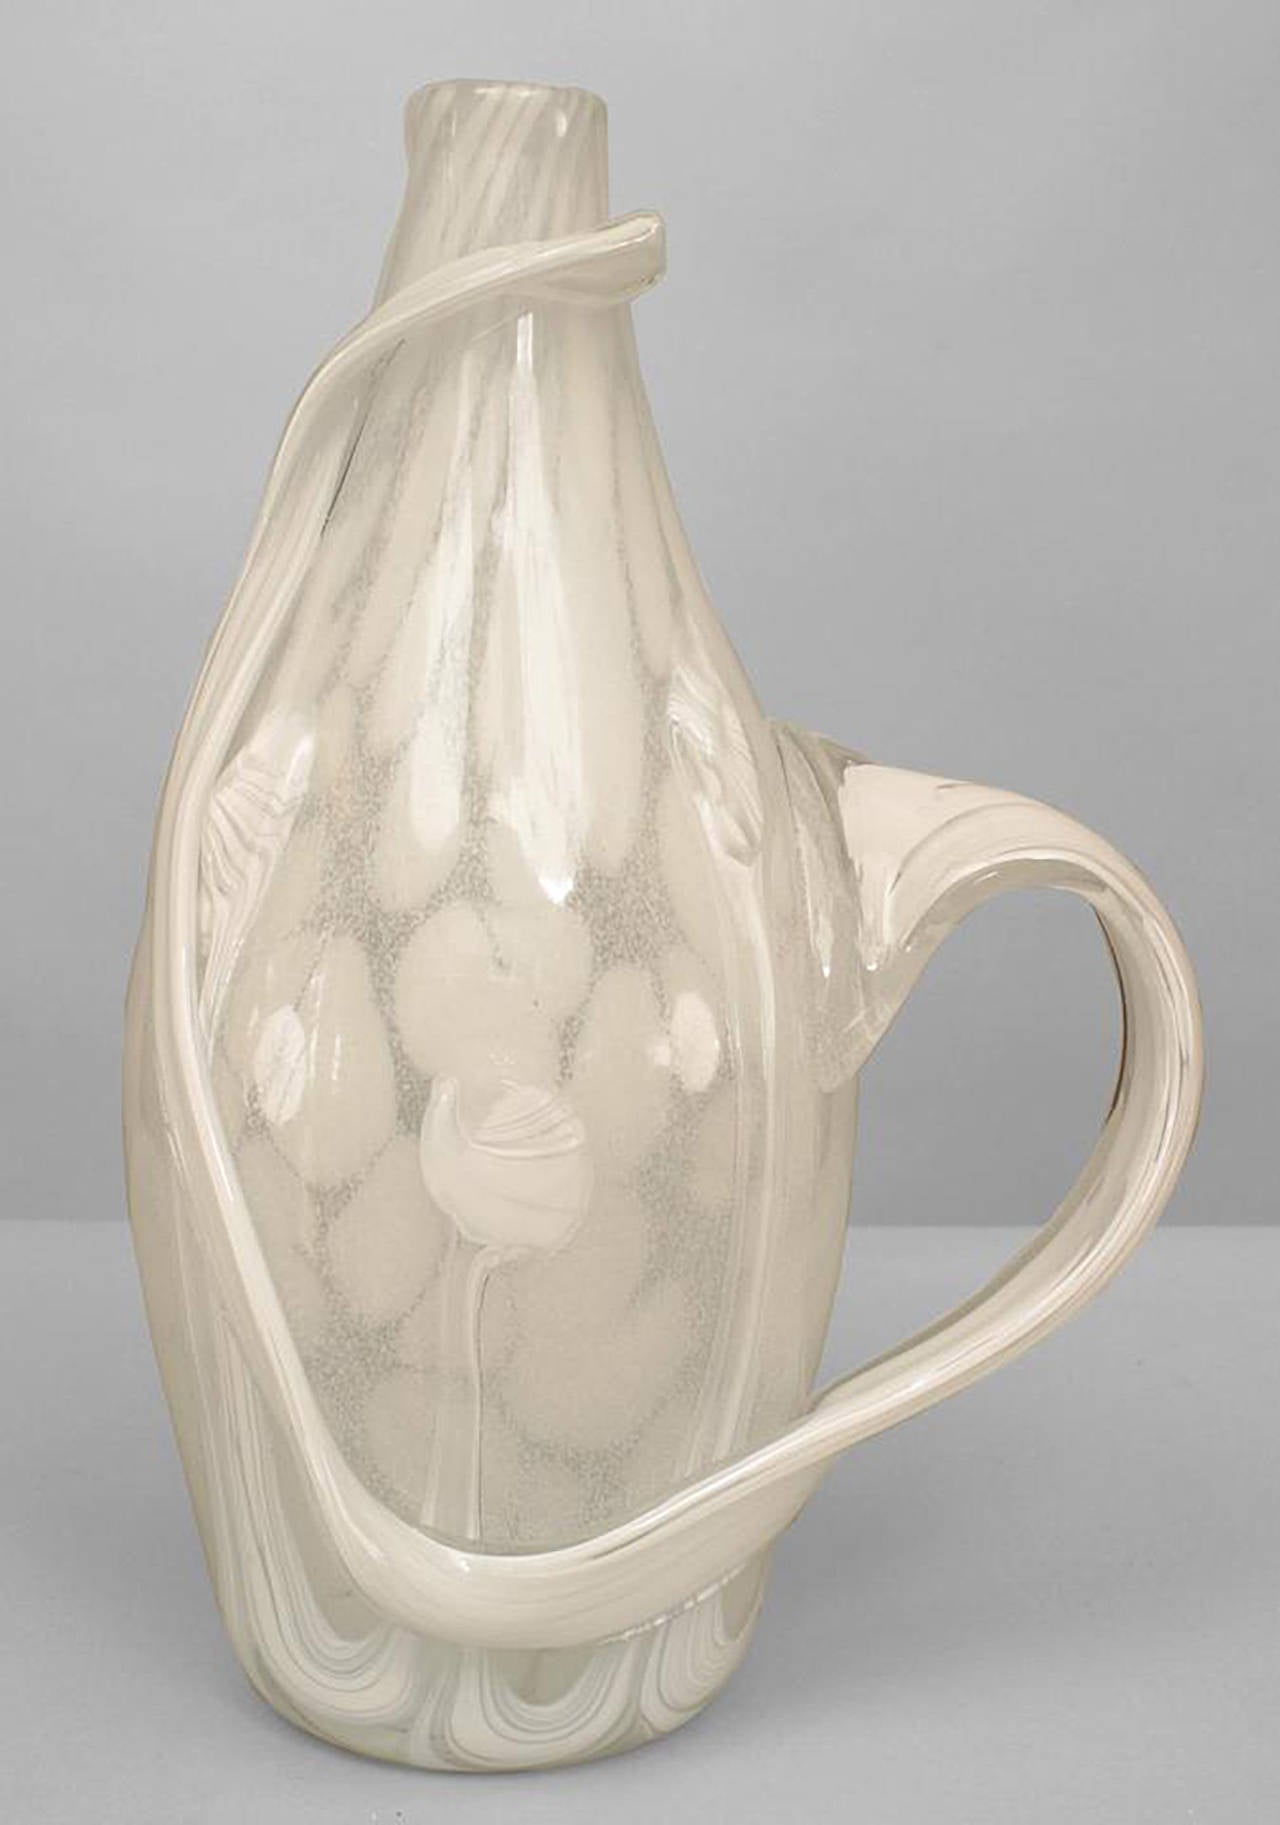 French Post-War Design vetro sommerso white shaded glass vase with free form design handle and applied trim (signed: by STEPHANE GAMBIER, titled: 